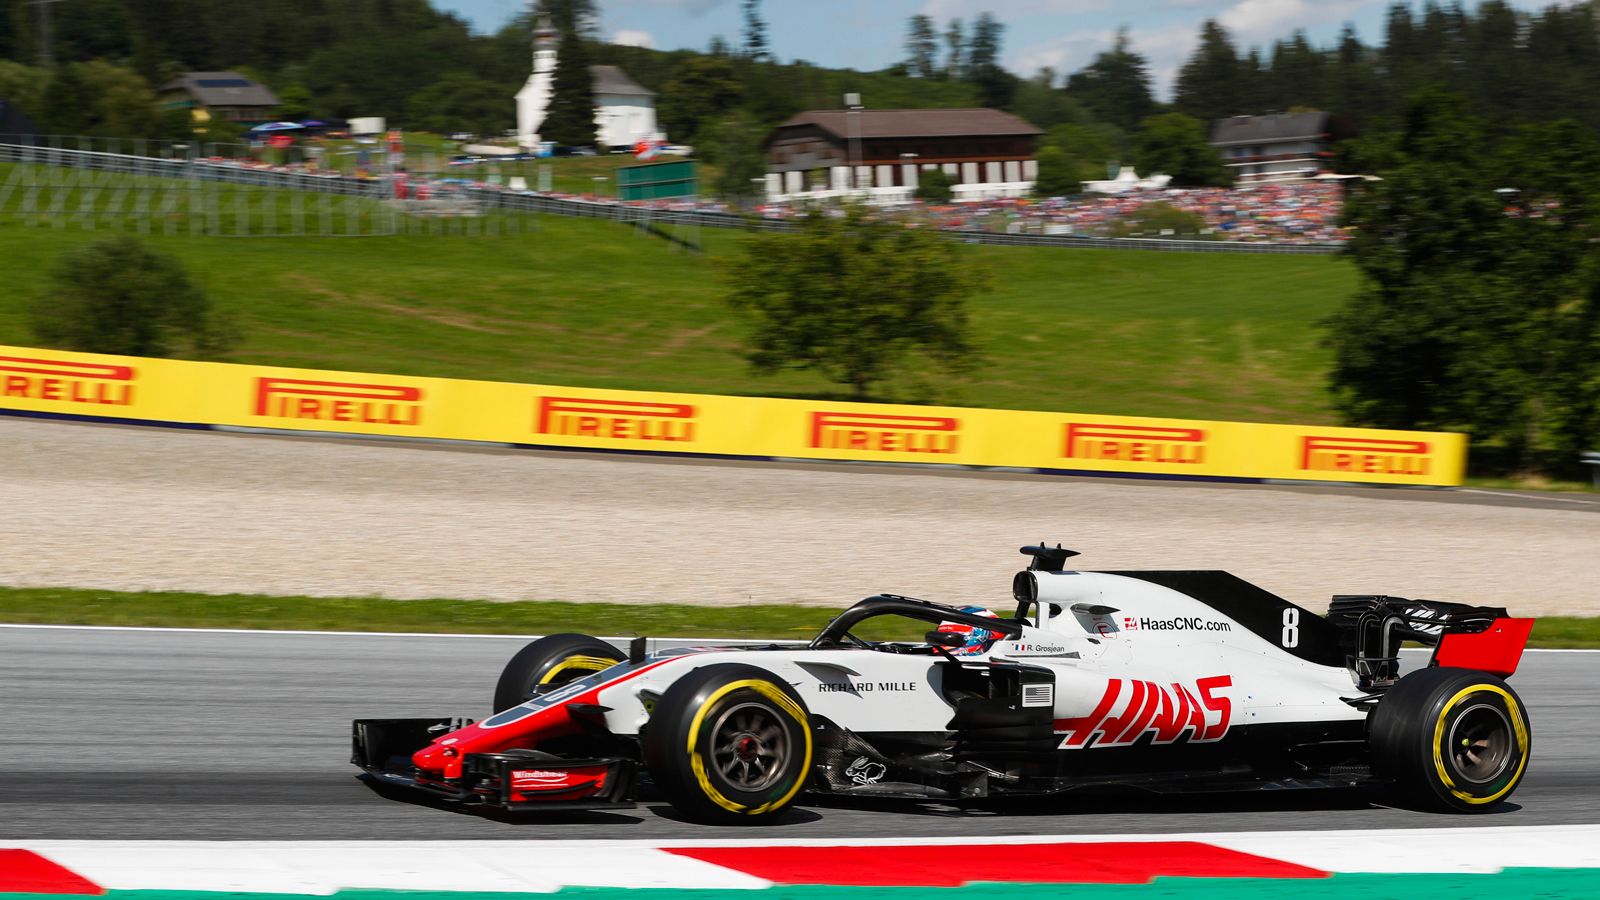 TV listings for 2019 F1 Austrian Grand Prix Where to find the racing action